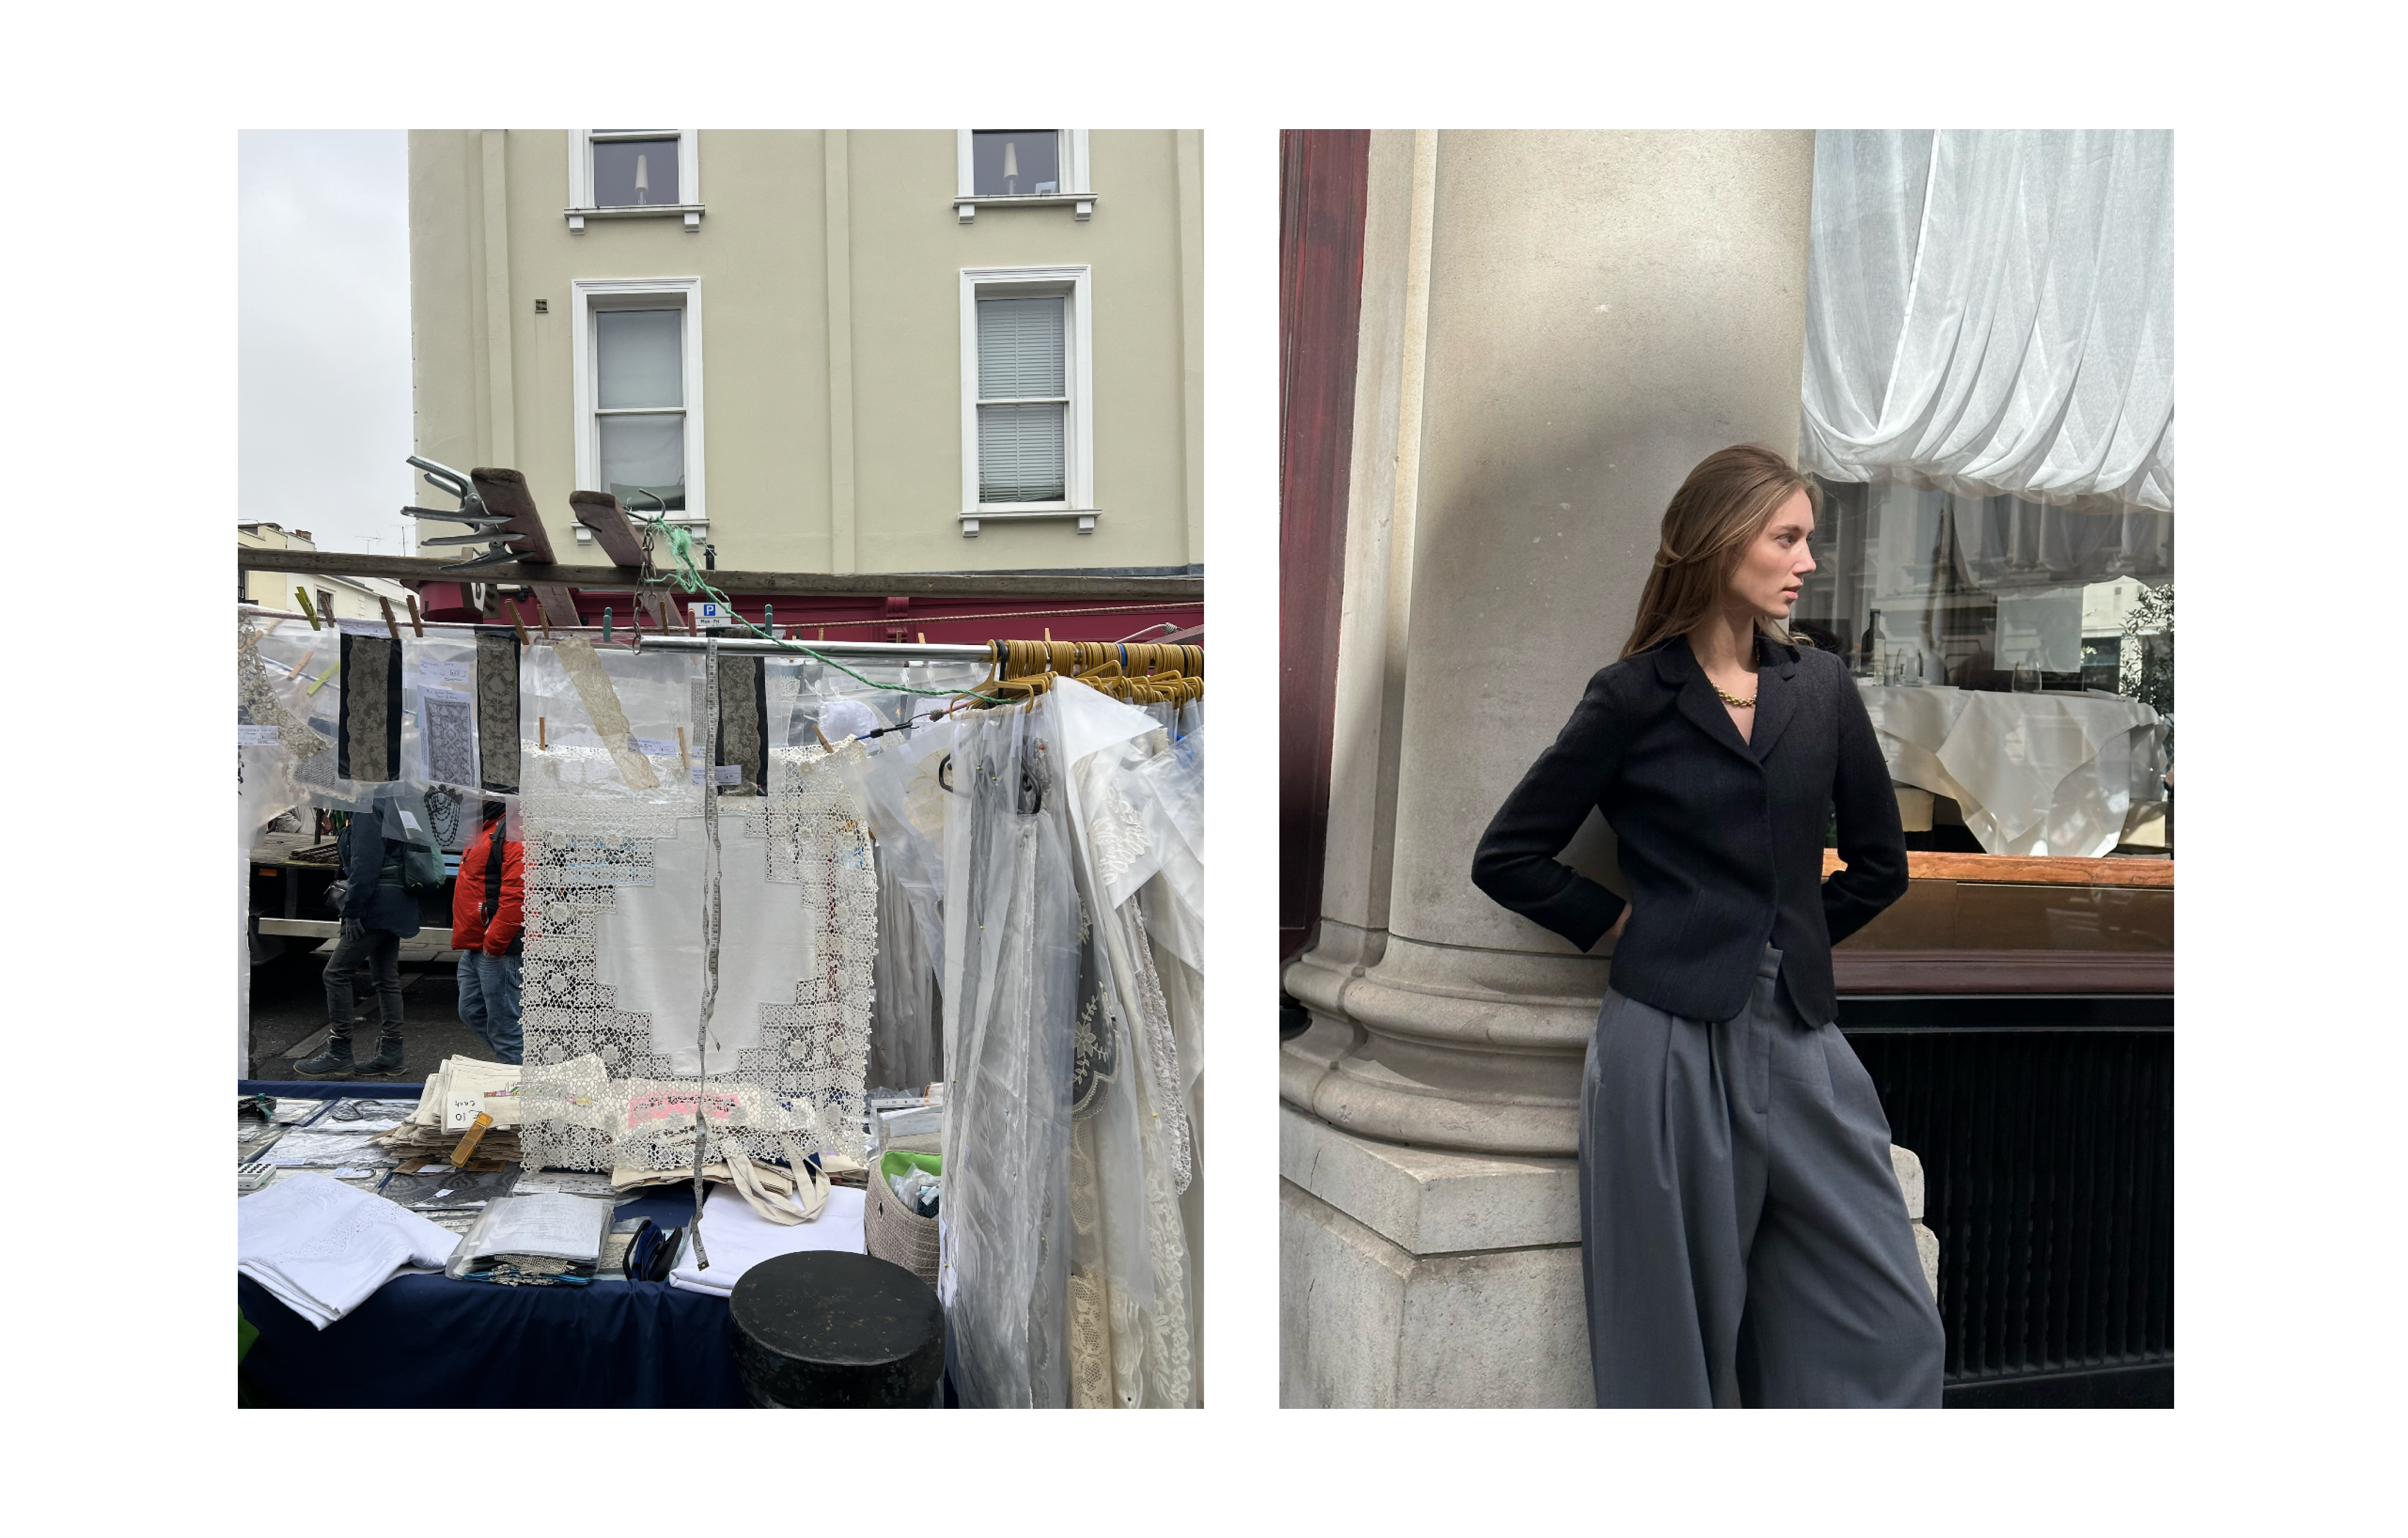 More snaps from Portobello Road Market, and Amalie enjoying a few sunrays while shooting the LIÉ STUDIO x NET-A-PORTER campaign. 